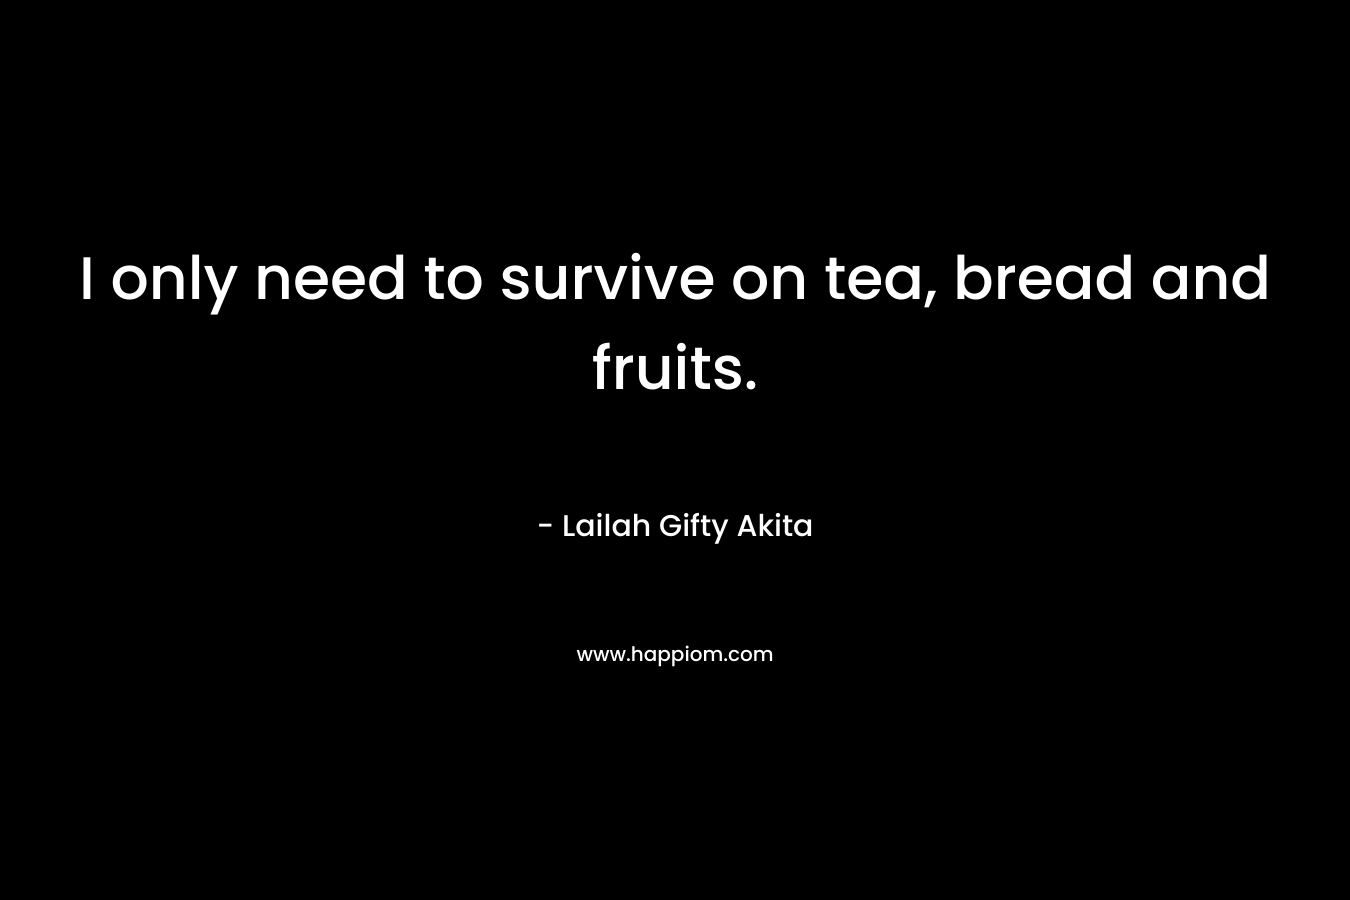 I only need to survive on tea, bread and fruits. – Lailah Gifty Akita